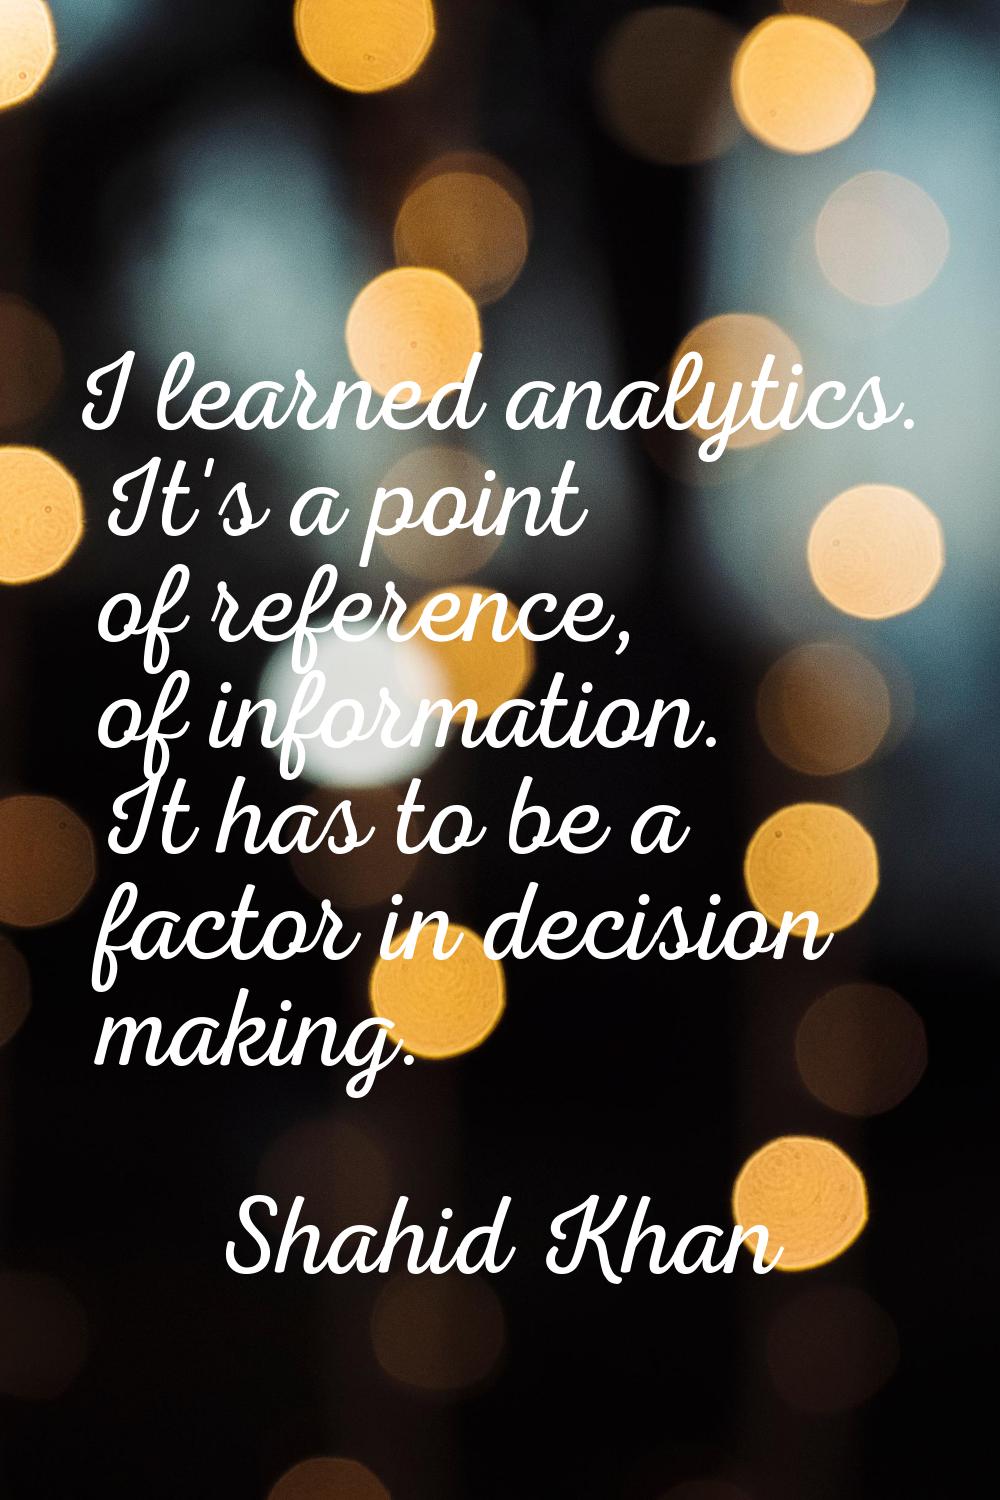 I learned analytics. It's a point of reference, of information. It has to be a factor in decision m